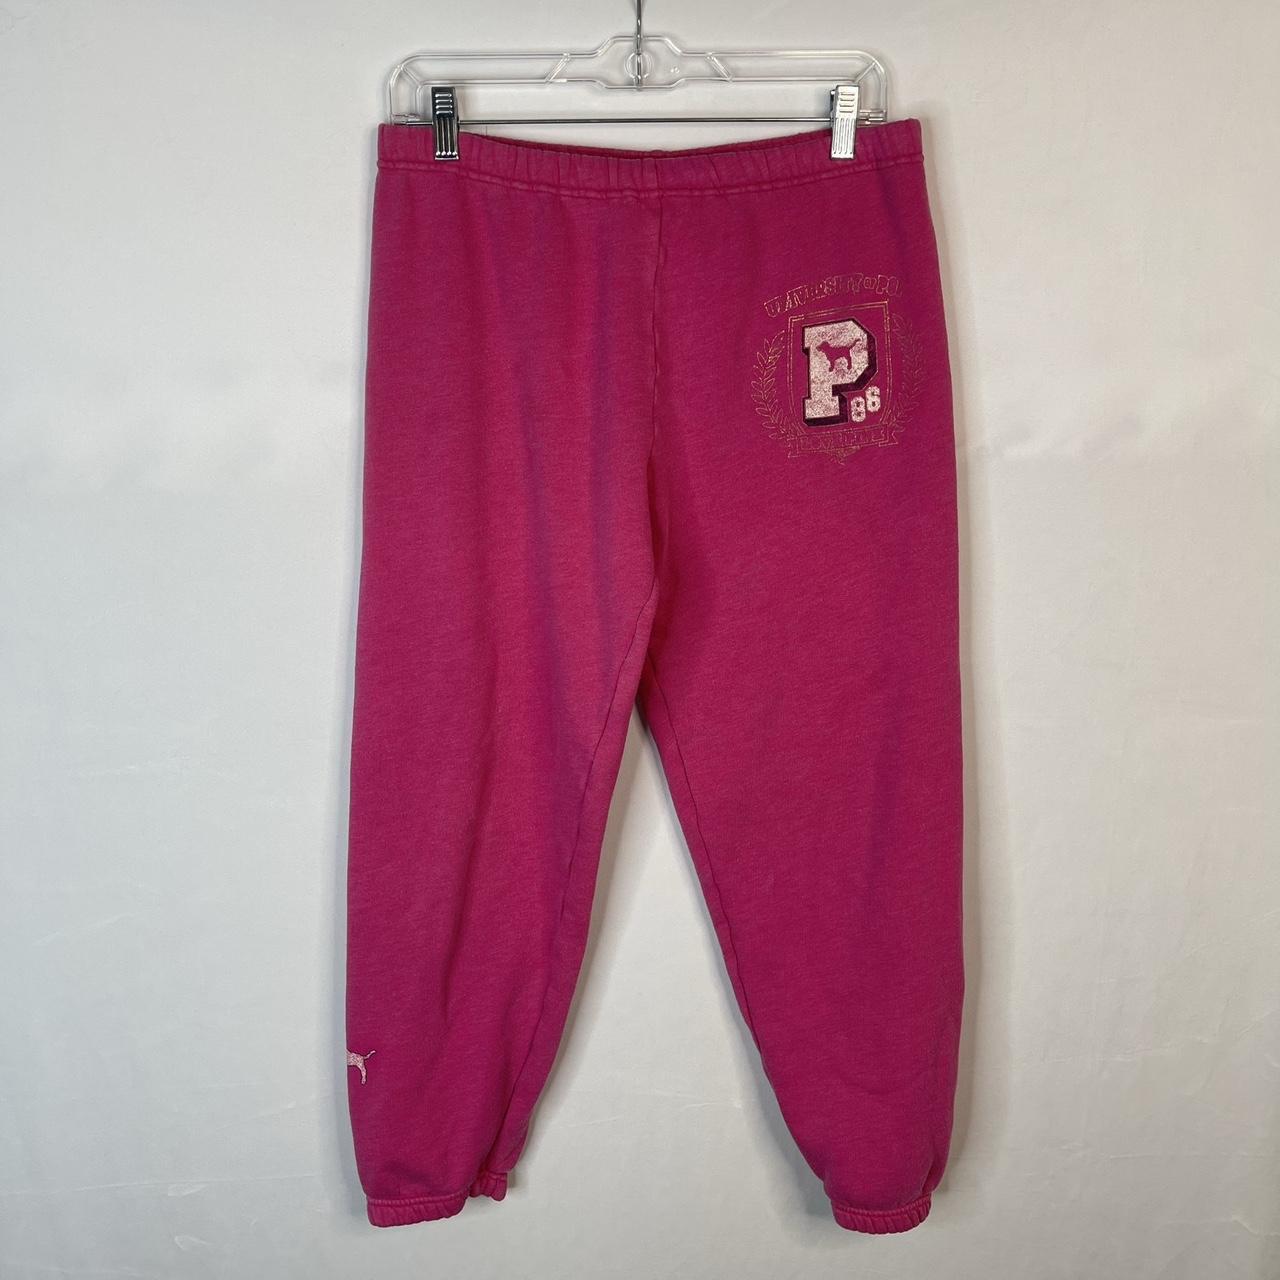 Early 2000s VS PINK sweat pants! These are soooo - Depop